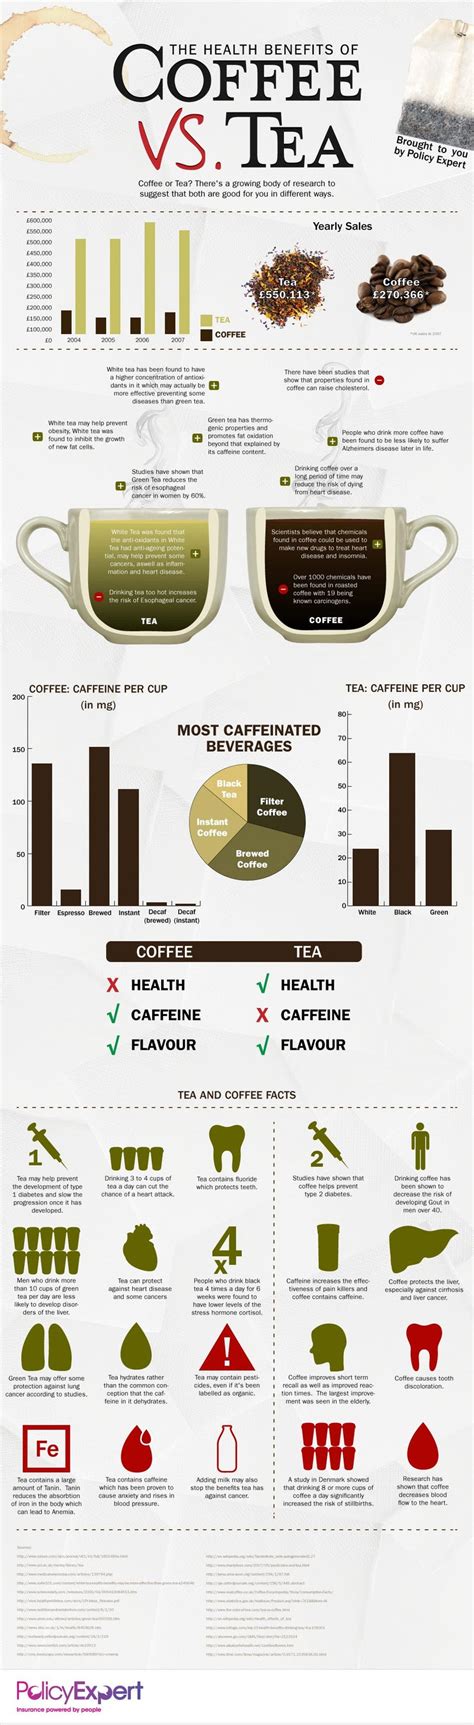 The Coffee Vs Tea Infographic Lays Out Each Drinks Benefits Side By Side